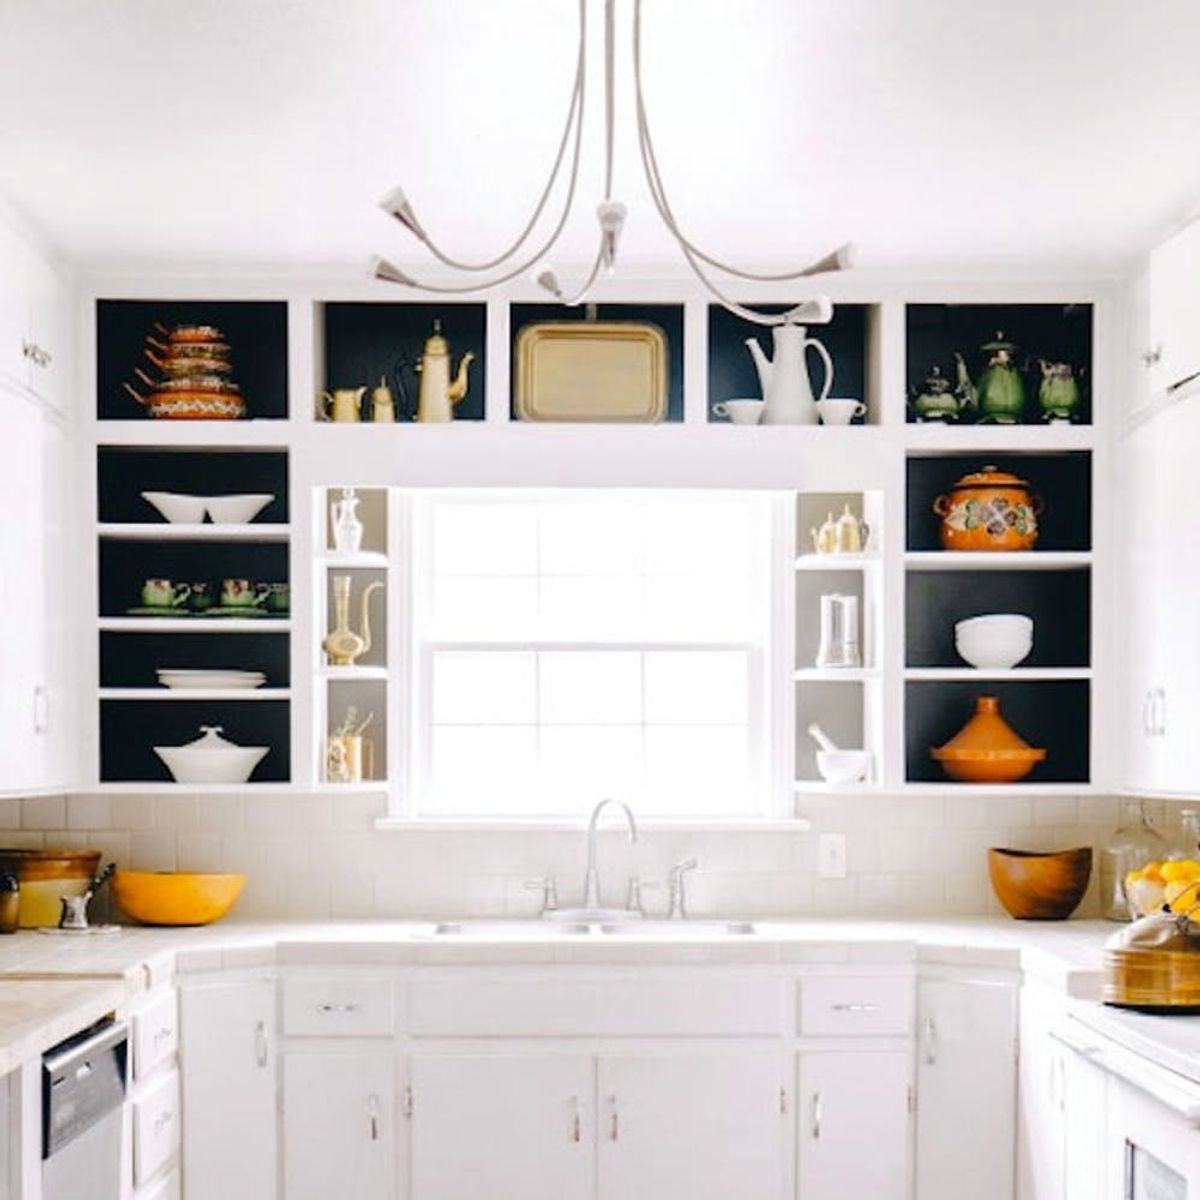 22 Ideas for Styling Open Kitchen Shelves